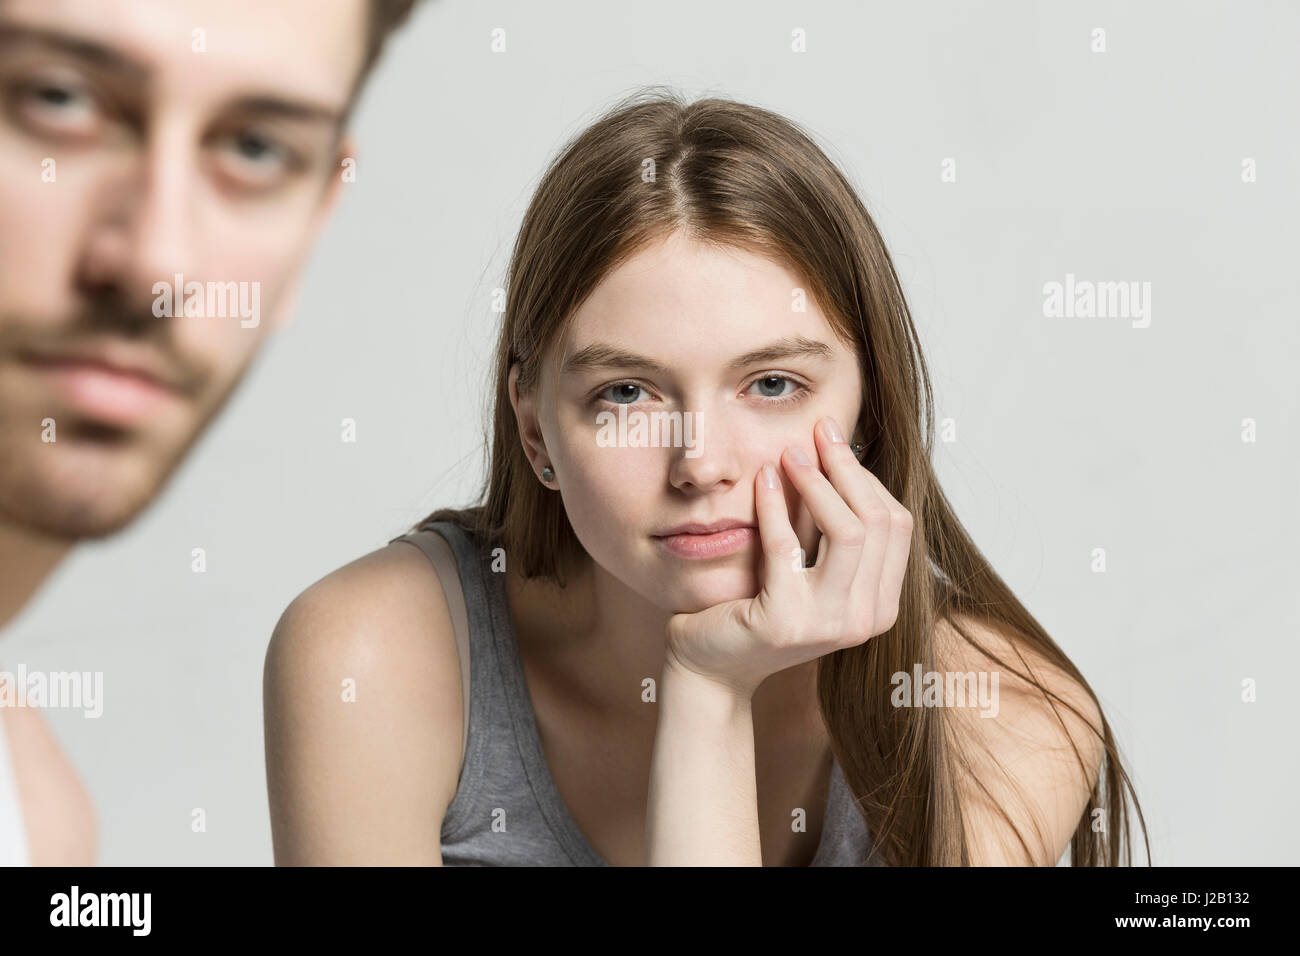 Portrait of man and woman against gray background Stock Photo